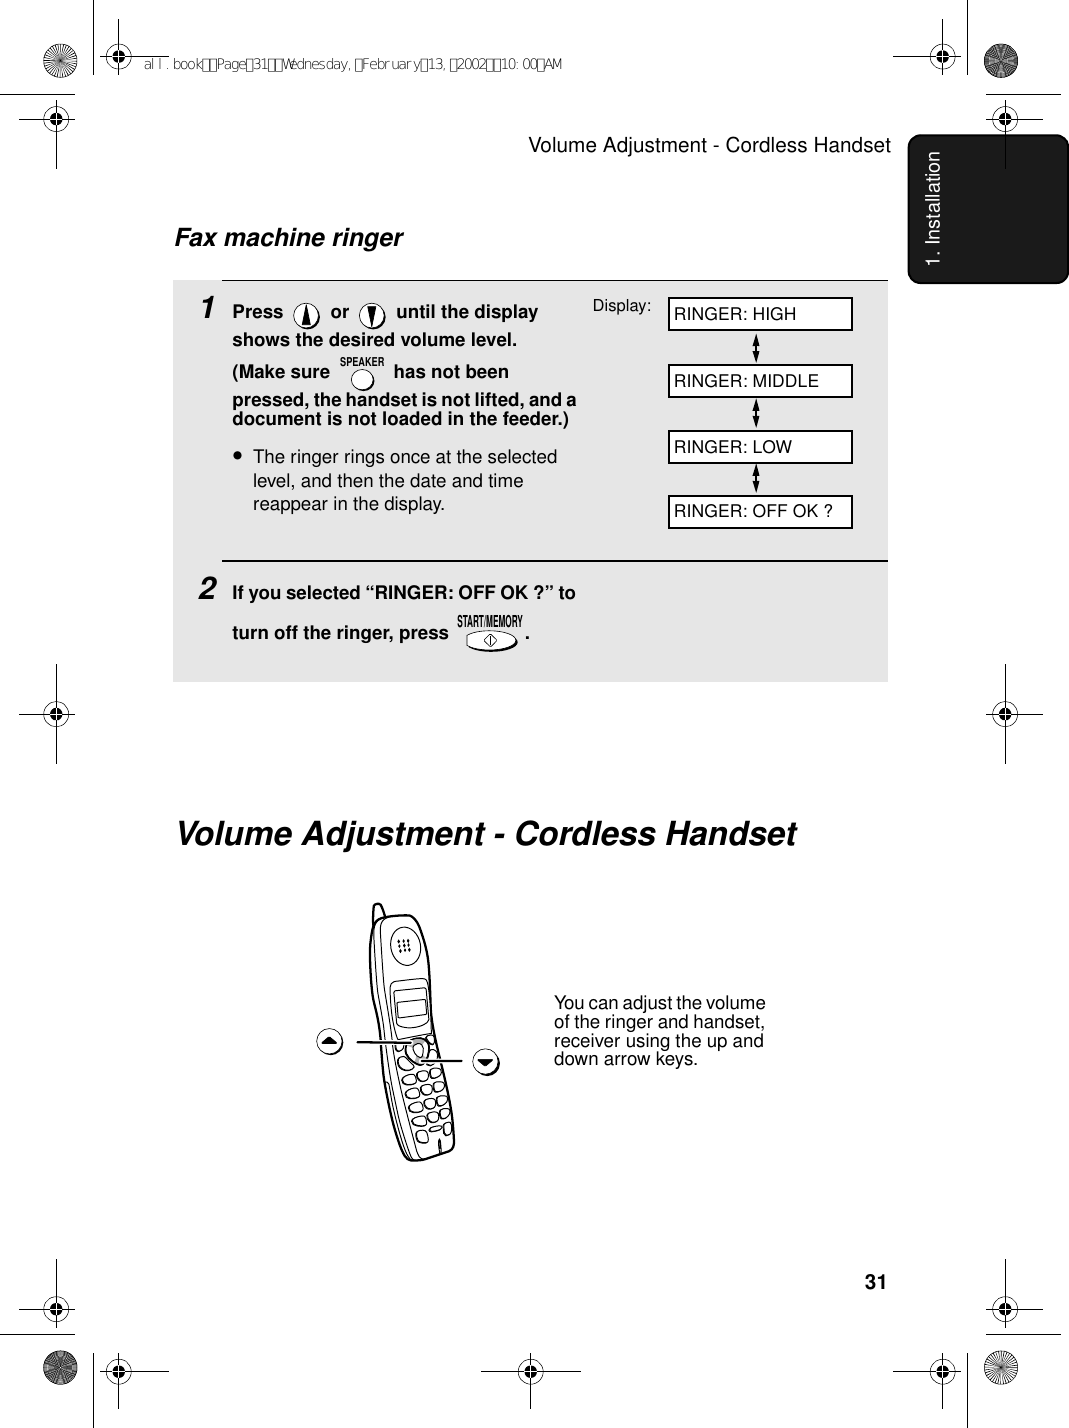 Volume Adjustment - Cordless Handset311. Installation1Press   or   until the display shows the desired volume level. (Make sure   has not been pressed, the handset is not lifted, and a document is not loaded in the feeder.)•The ringer rings once at the selected level, and then the date and time reappear in the display.2If you selected “RINGER: OFF OK ?” to turn off the ringer, press  .SPEAKERSTART/MEMORYFax machine ringerDisplay: RINGER: HIGHRINGER: MIDDLERINGER: LOWRINGER: OFF OK ?Volume Adjustment - Cordless HandsetYou can adjust the volume of the ringer and handset, receiver using the up and down arrow keys.all.bookPage31Wednesday,February13,200210:00AM